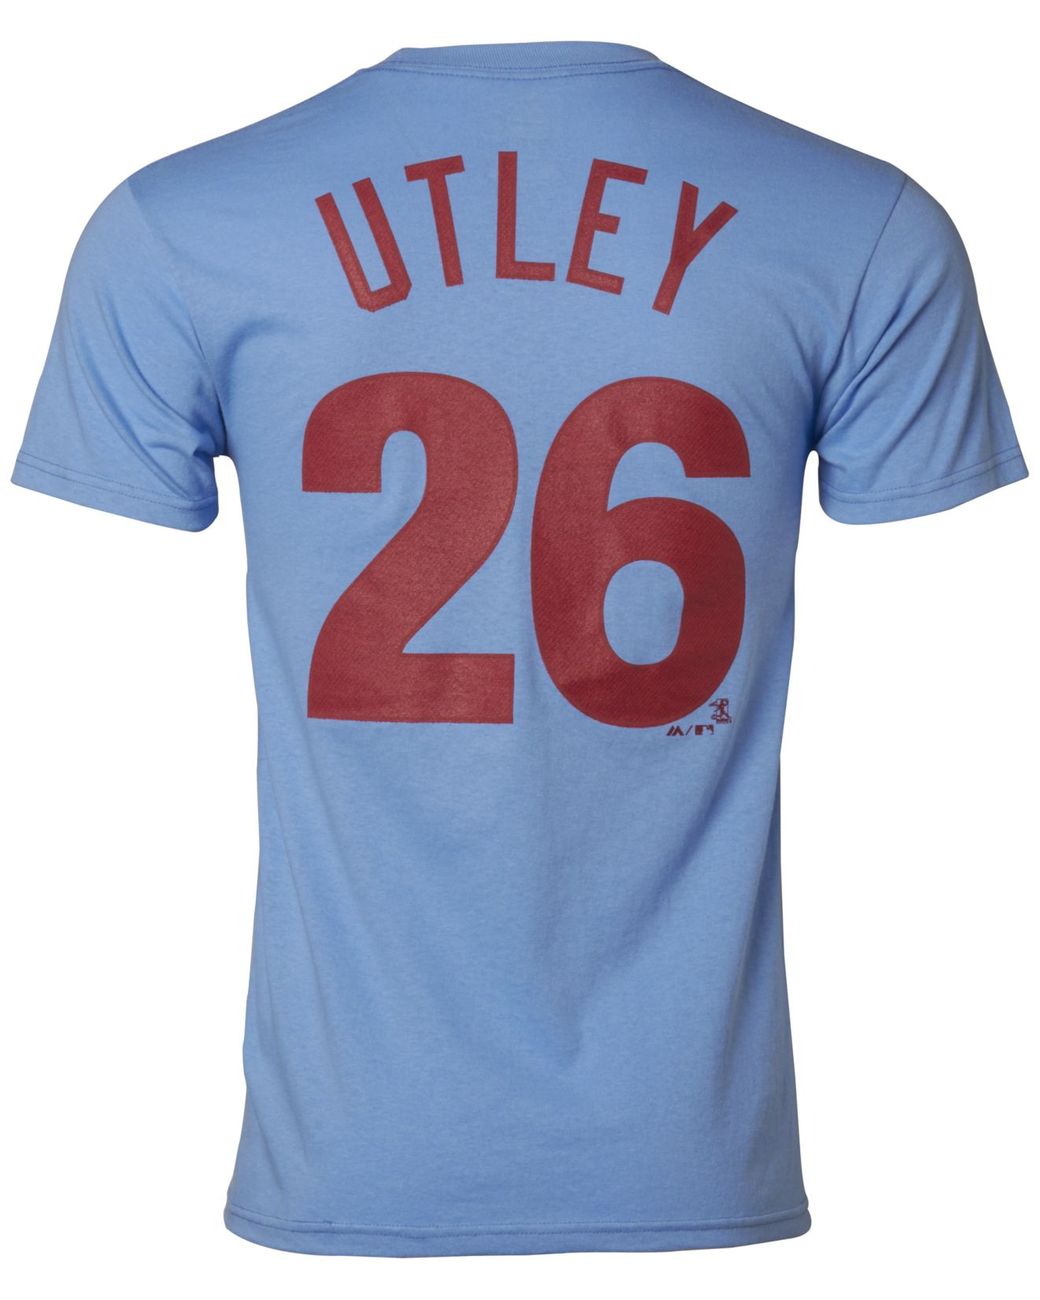 Majestic, Shirts, Mlb Phillies Chase Utley 26 Home Jersey 209 Ws